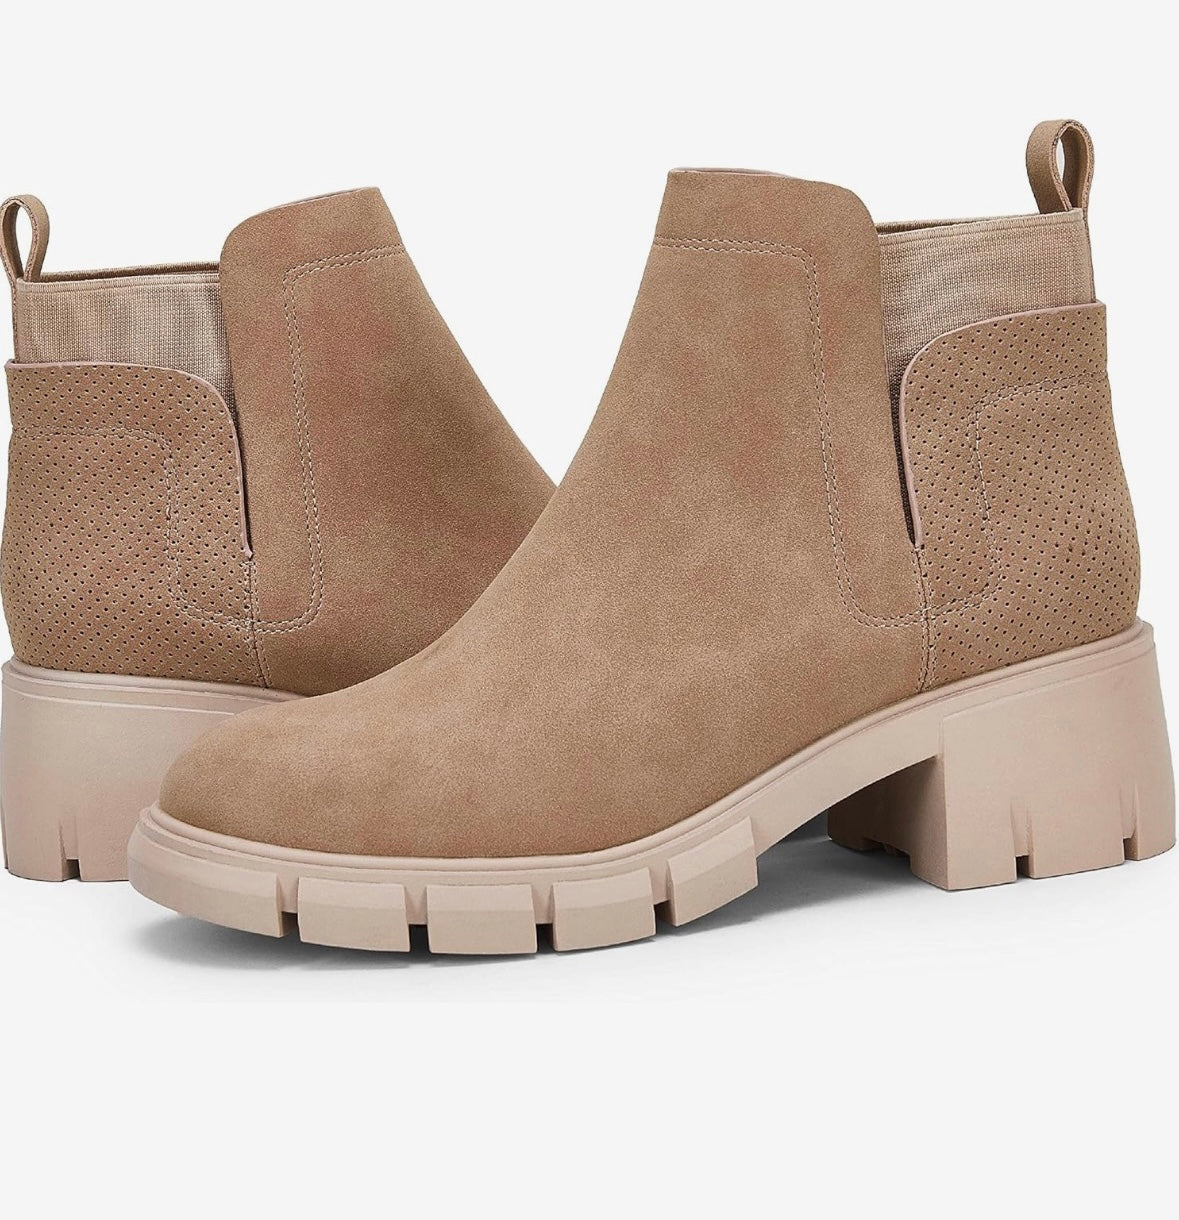 NUDE FALL BOOTS